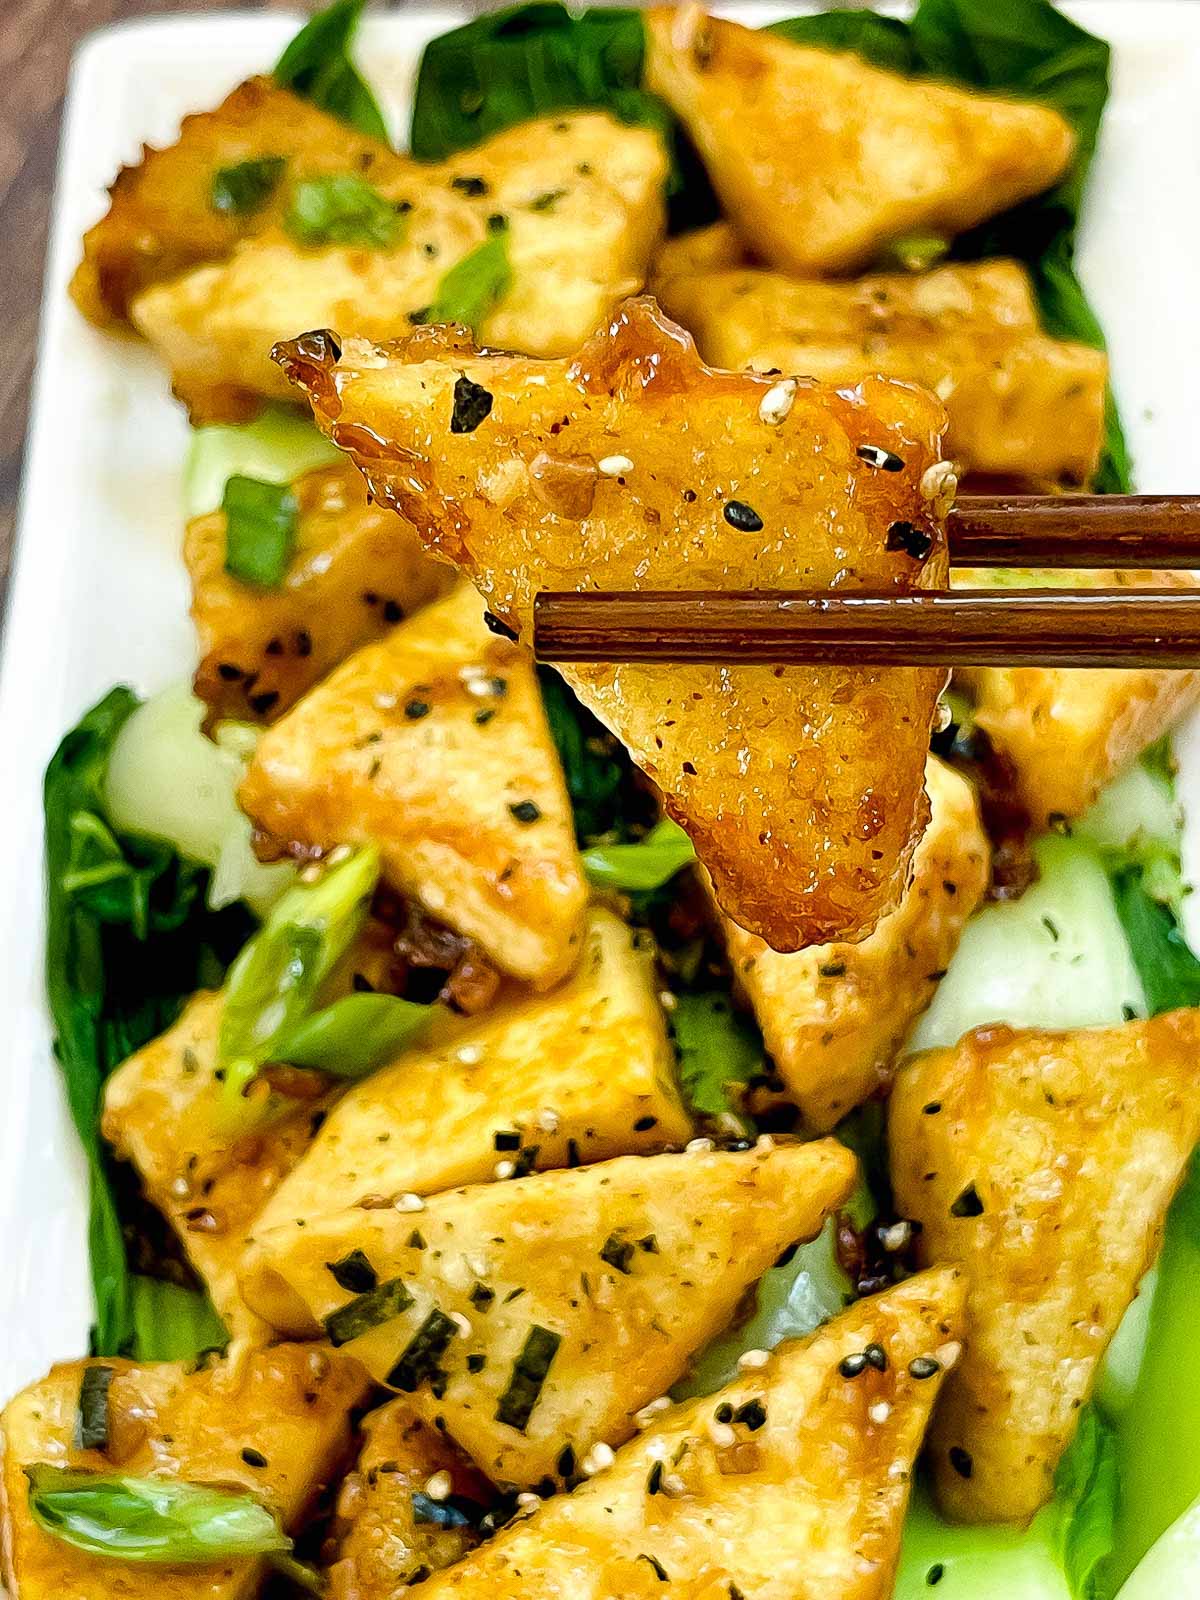 Golden-brown, crispy tofu steaks piled on top of cooked baby bok choy with a pair up chopsticks holding up one piece of tofu.